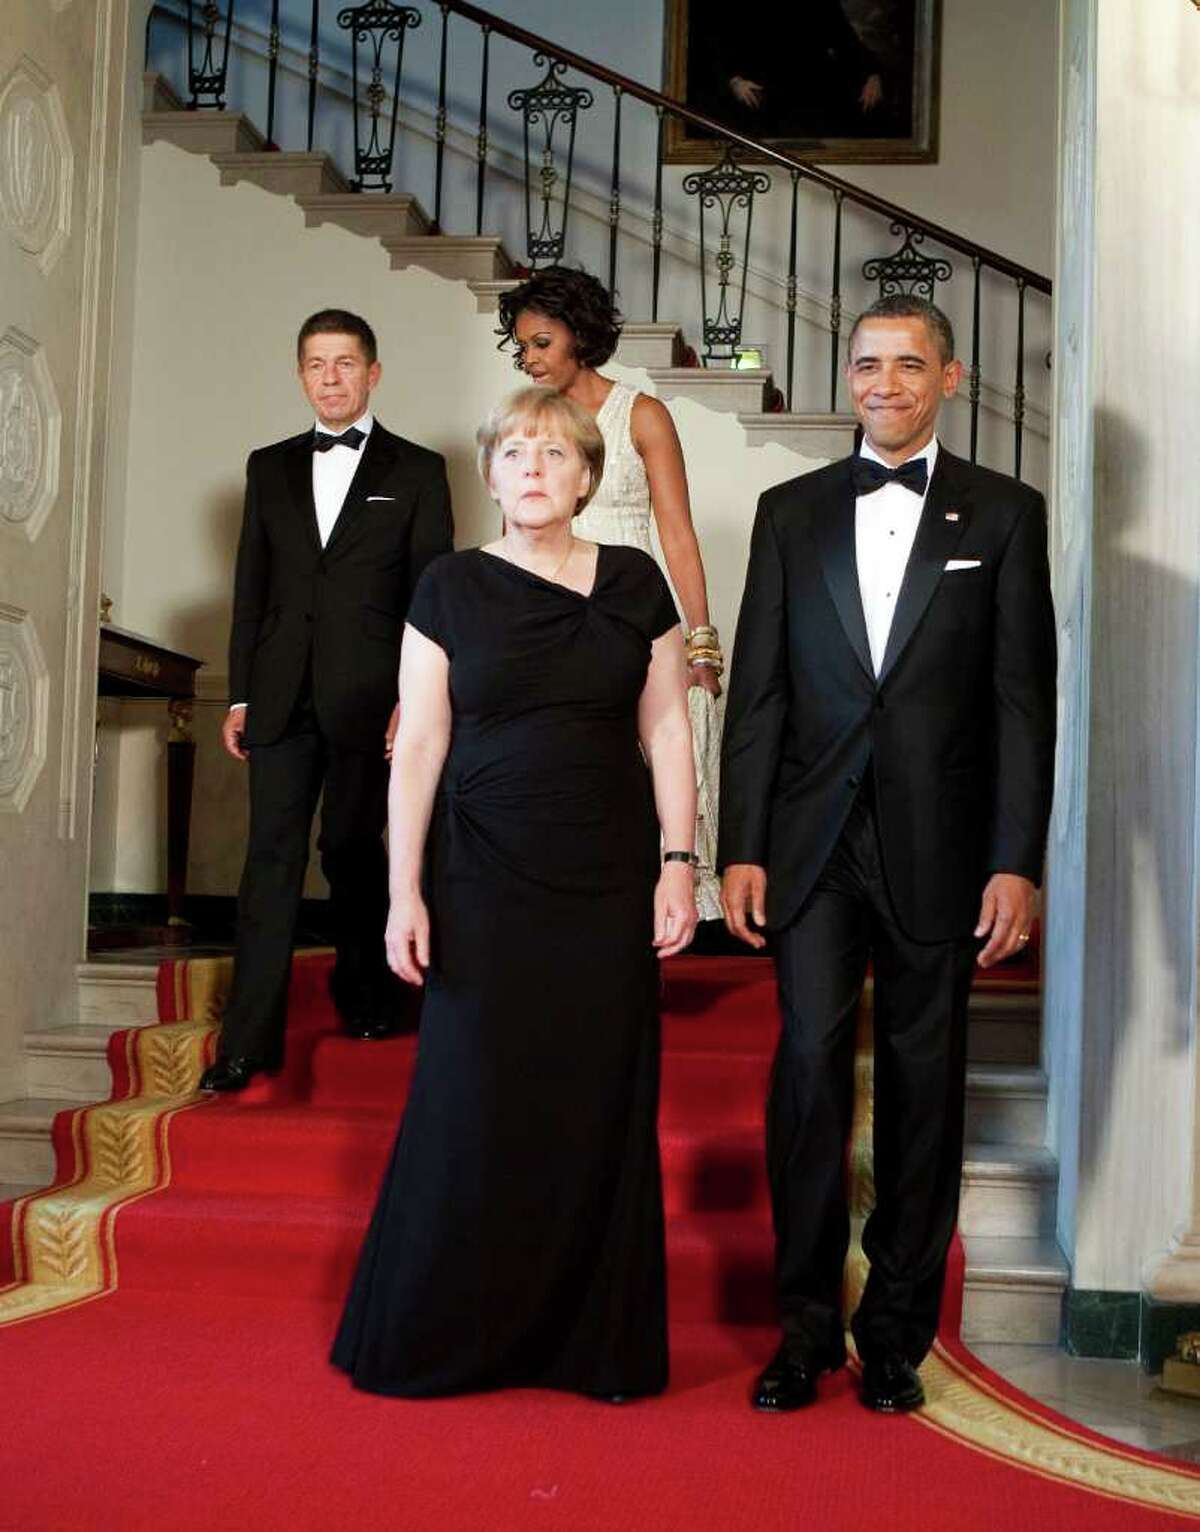 From right, U.S. President Barack Obama, Angela Merkel, chancellor of Germany, First Lady Michelle Obama and Joachim Sauer, Merkel's husband, poses for a portrait at the White House on June 7, 2011 in Washington, DC. This is the first official visit by a European leader to the White House since Obama became president. Merkel will be presented with the 2010 Medal of Freedom at a state dinner tonight.